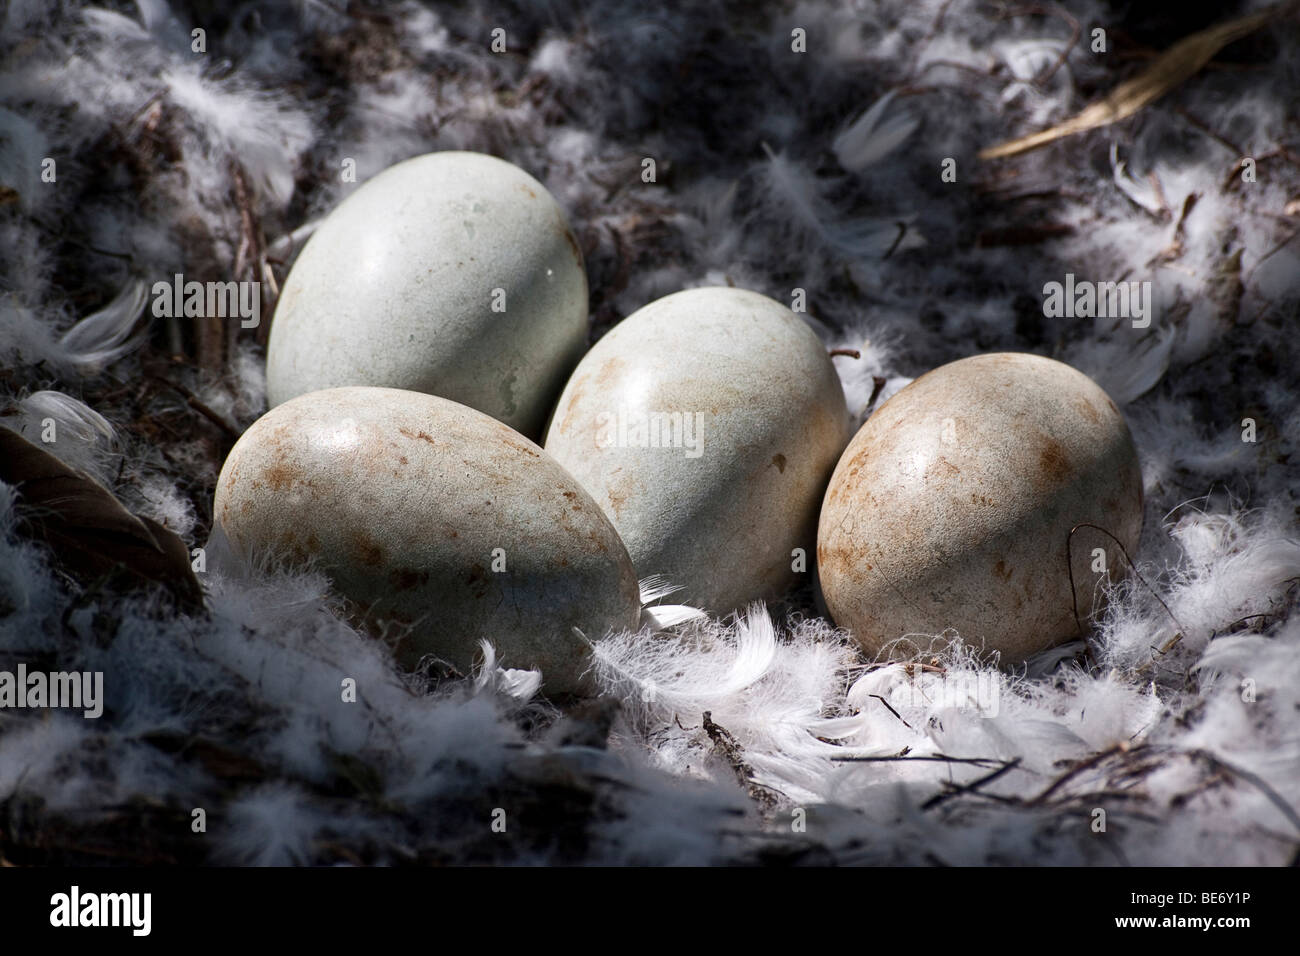 Swan nest with four eggs, nest made of feathers and twigs Stock Photo